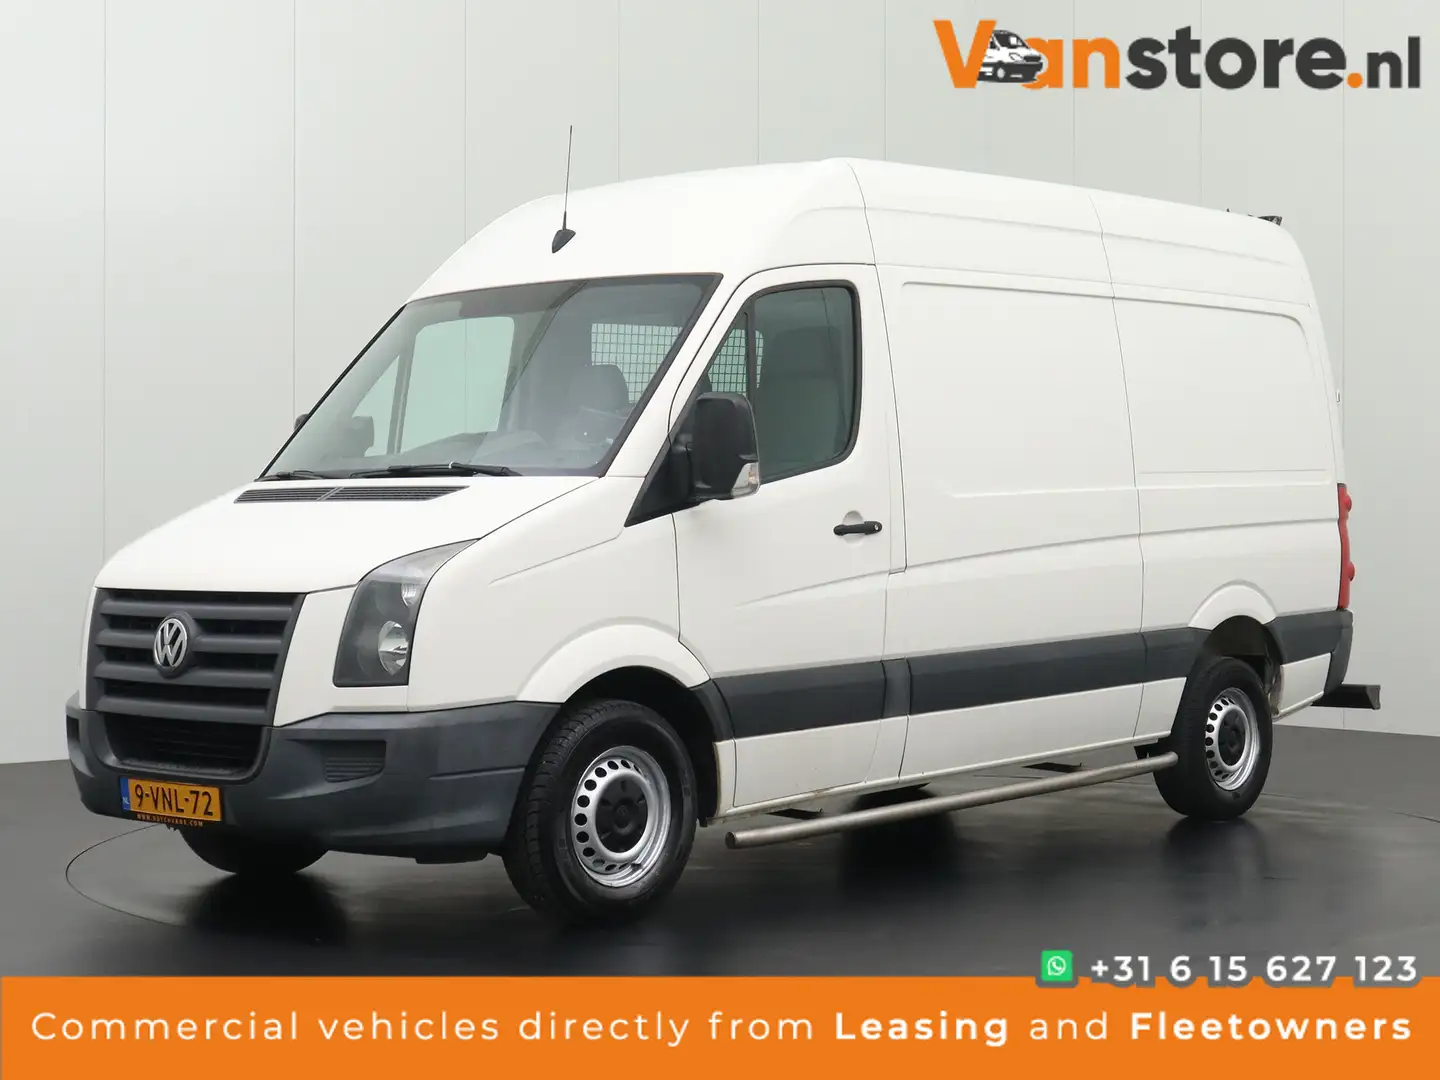 Volkswagen Crafter 2.5TDI 136PK L2H2 | 3500Kg Trekhaak | Airco | Came Wit - 1